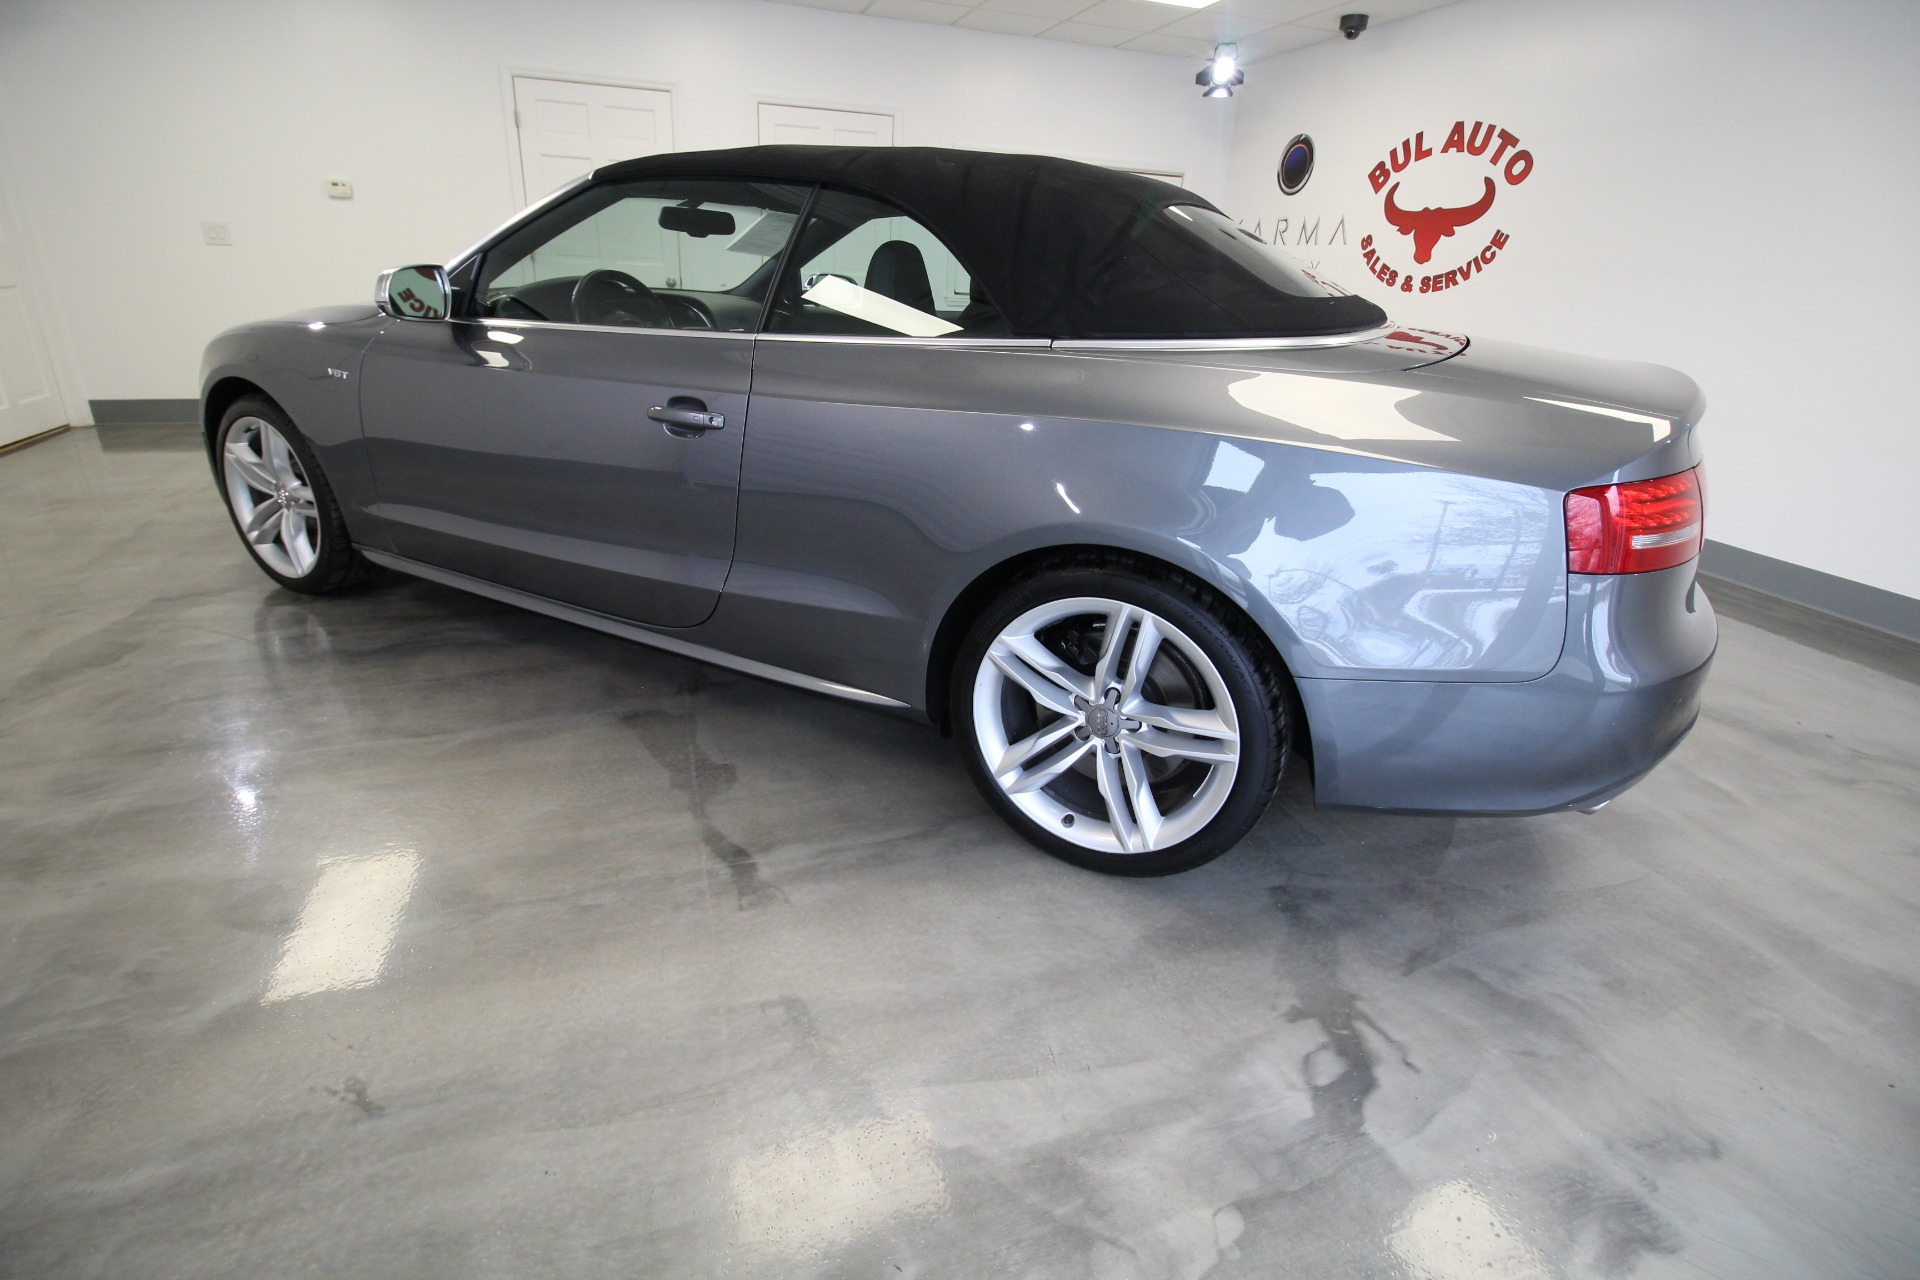 Used 2012 Monsoon Gray Metallic with Black Soft Convertible Top Audi S5 3.0T Cabriolet quattro S tronic | Albany, NY